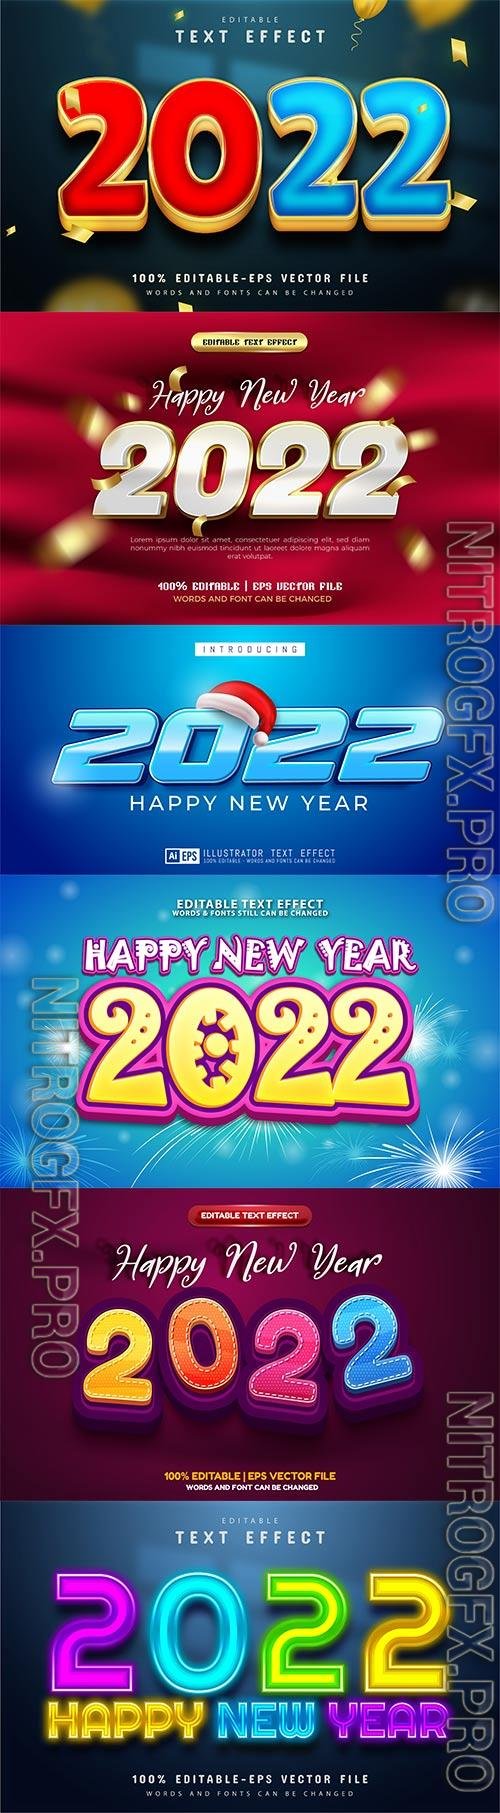 Merry christmas and happy new year 2022 editable vector text effects vol 5